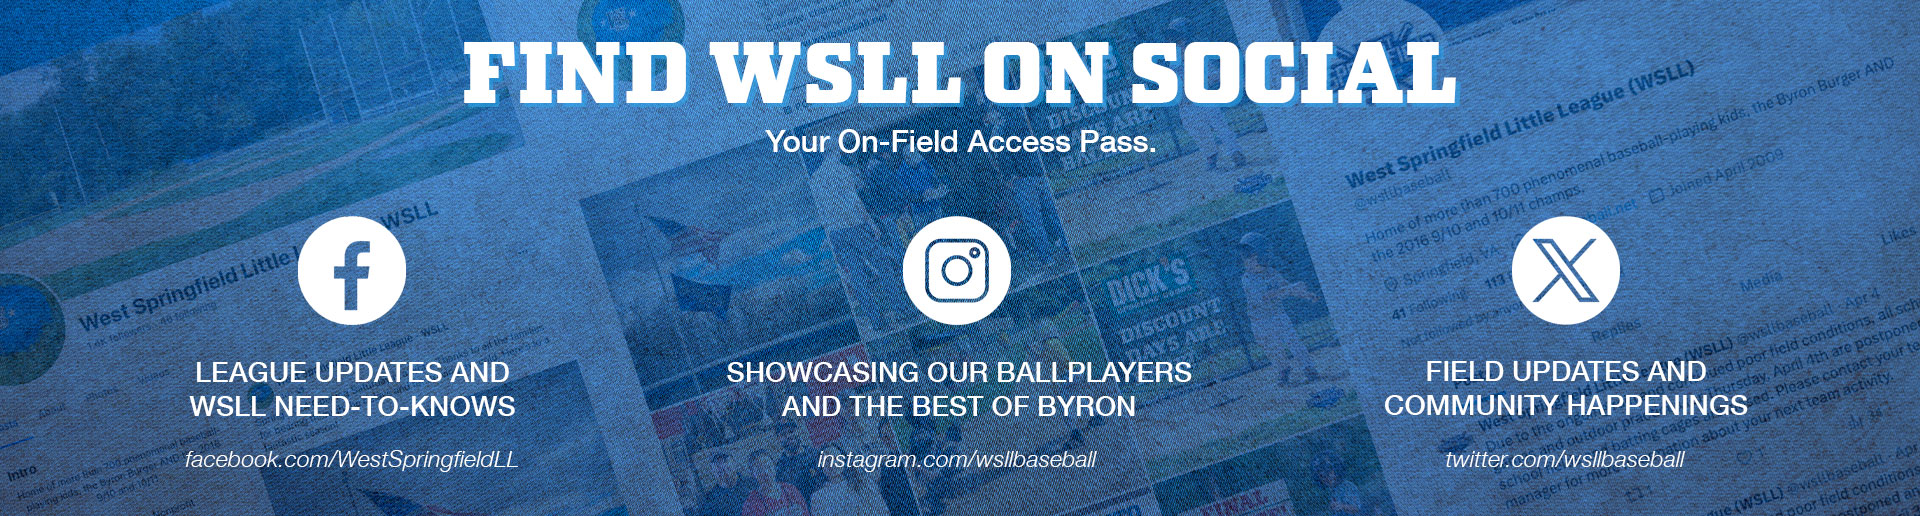 CONNECT WITH WSLL ON SOCIAL